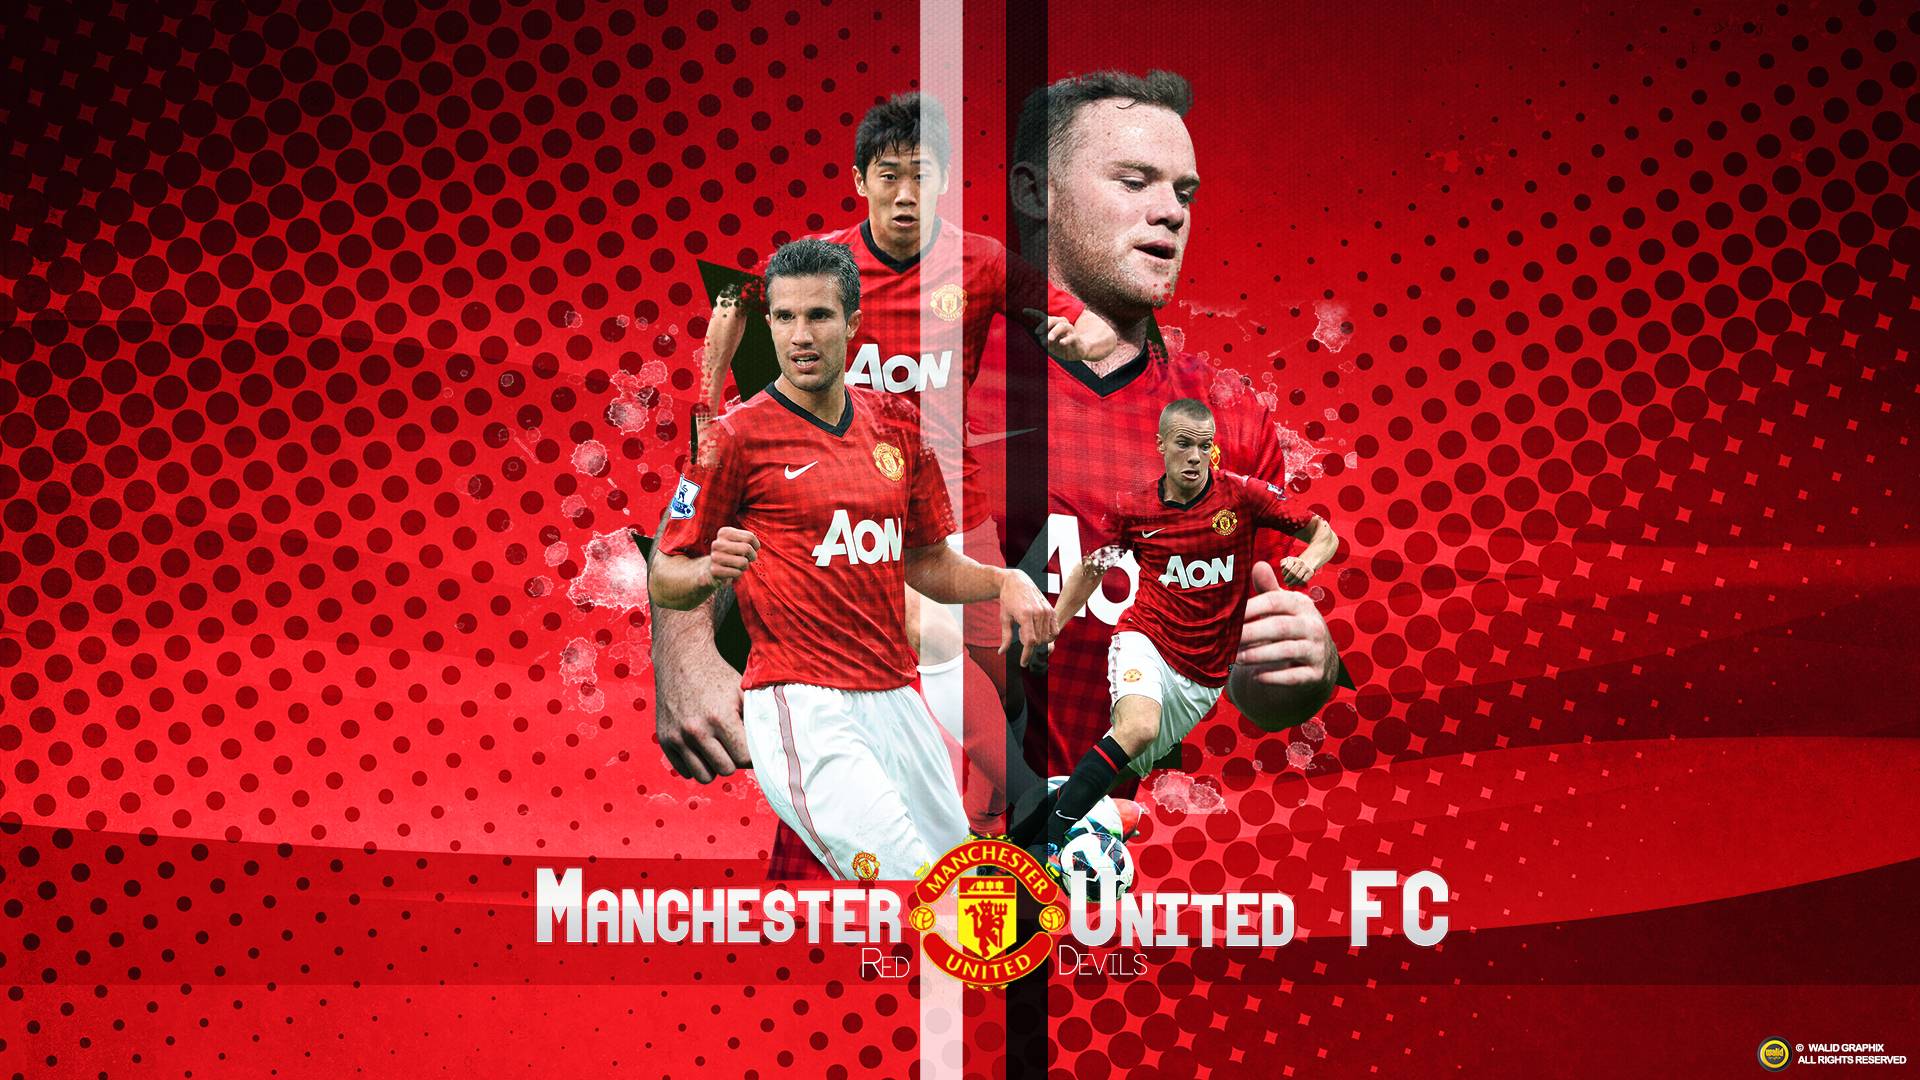 Manchester United Wallpapers HD 2016 Wallpapers